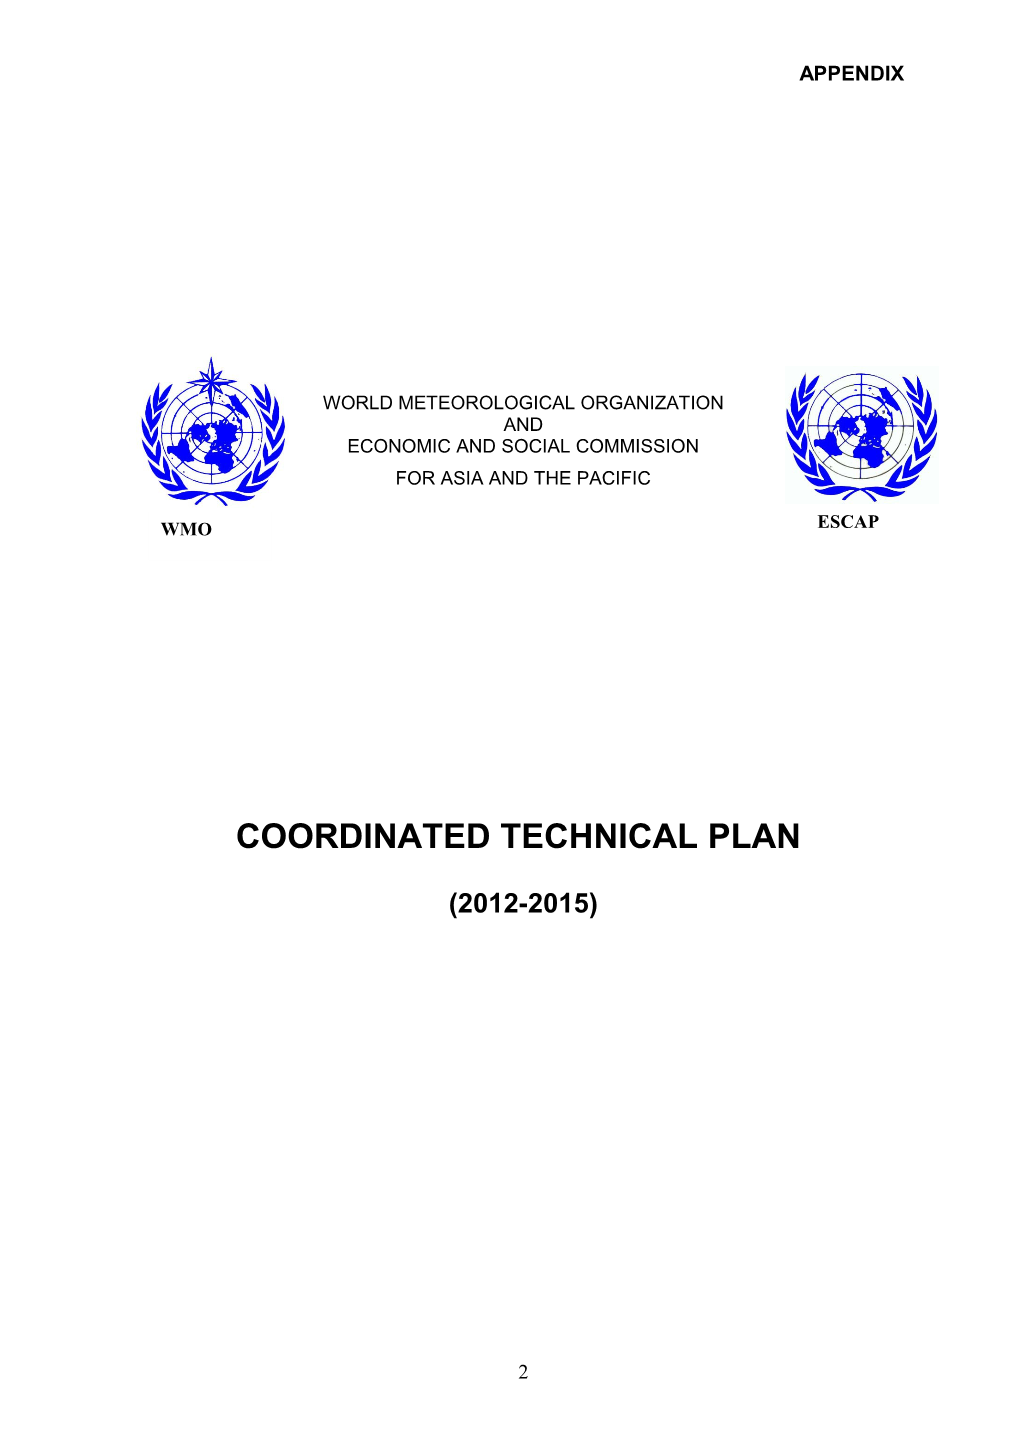 Review of the Coordinated Technical Plan and Consideration Of